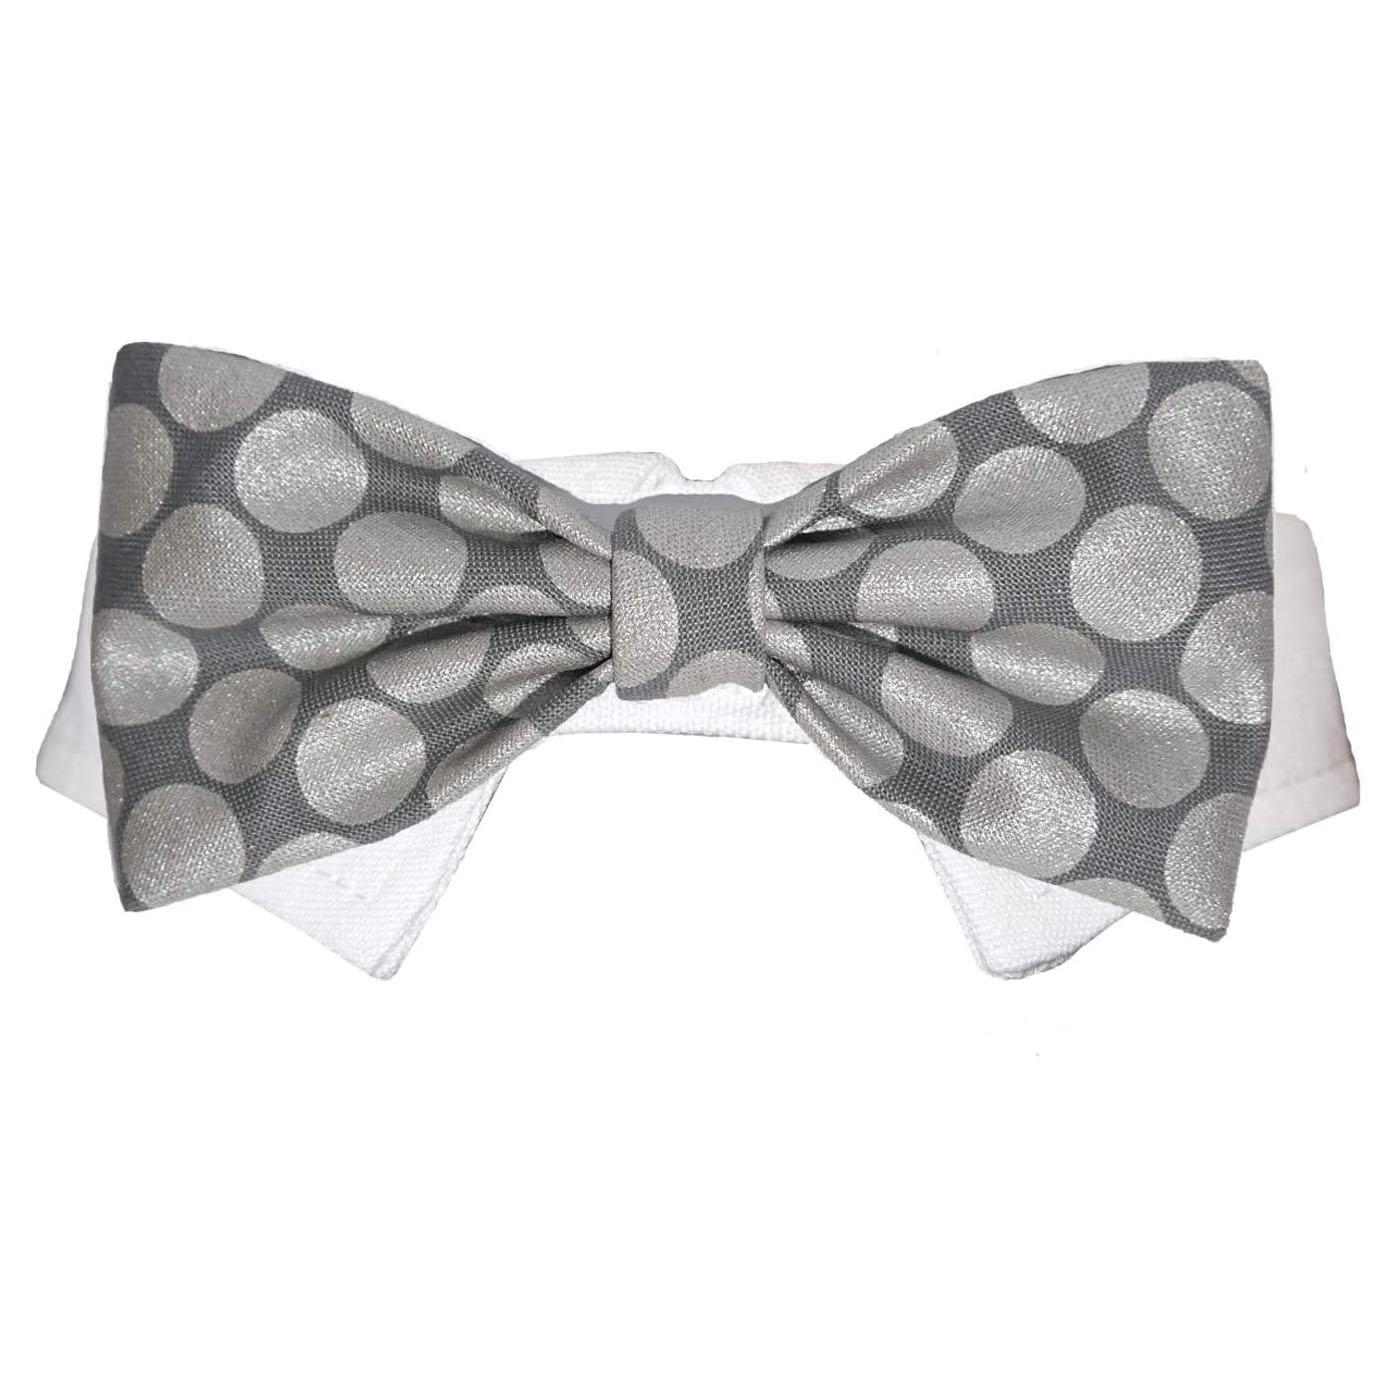 Pooch Outfitters Bentley Dog Shirt Collar and Bow Tie - Silver Polka Dot